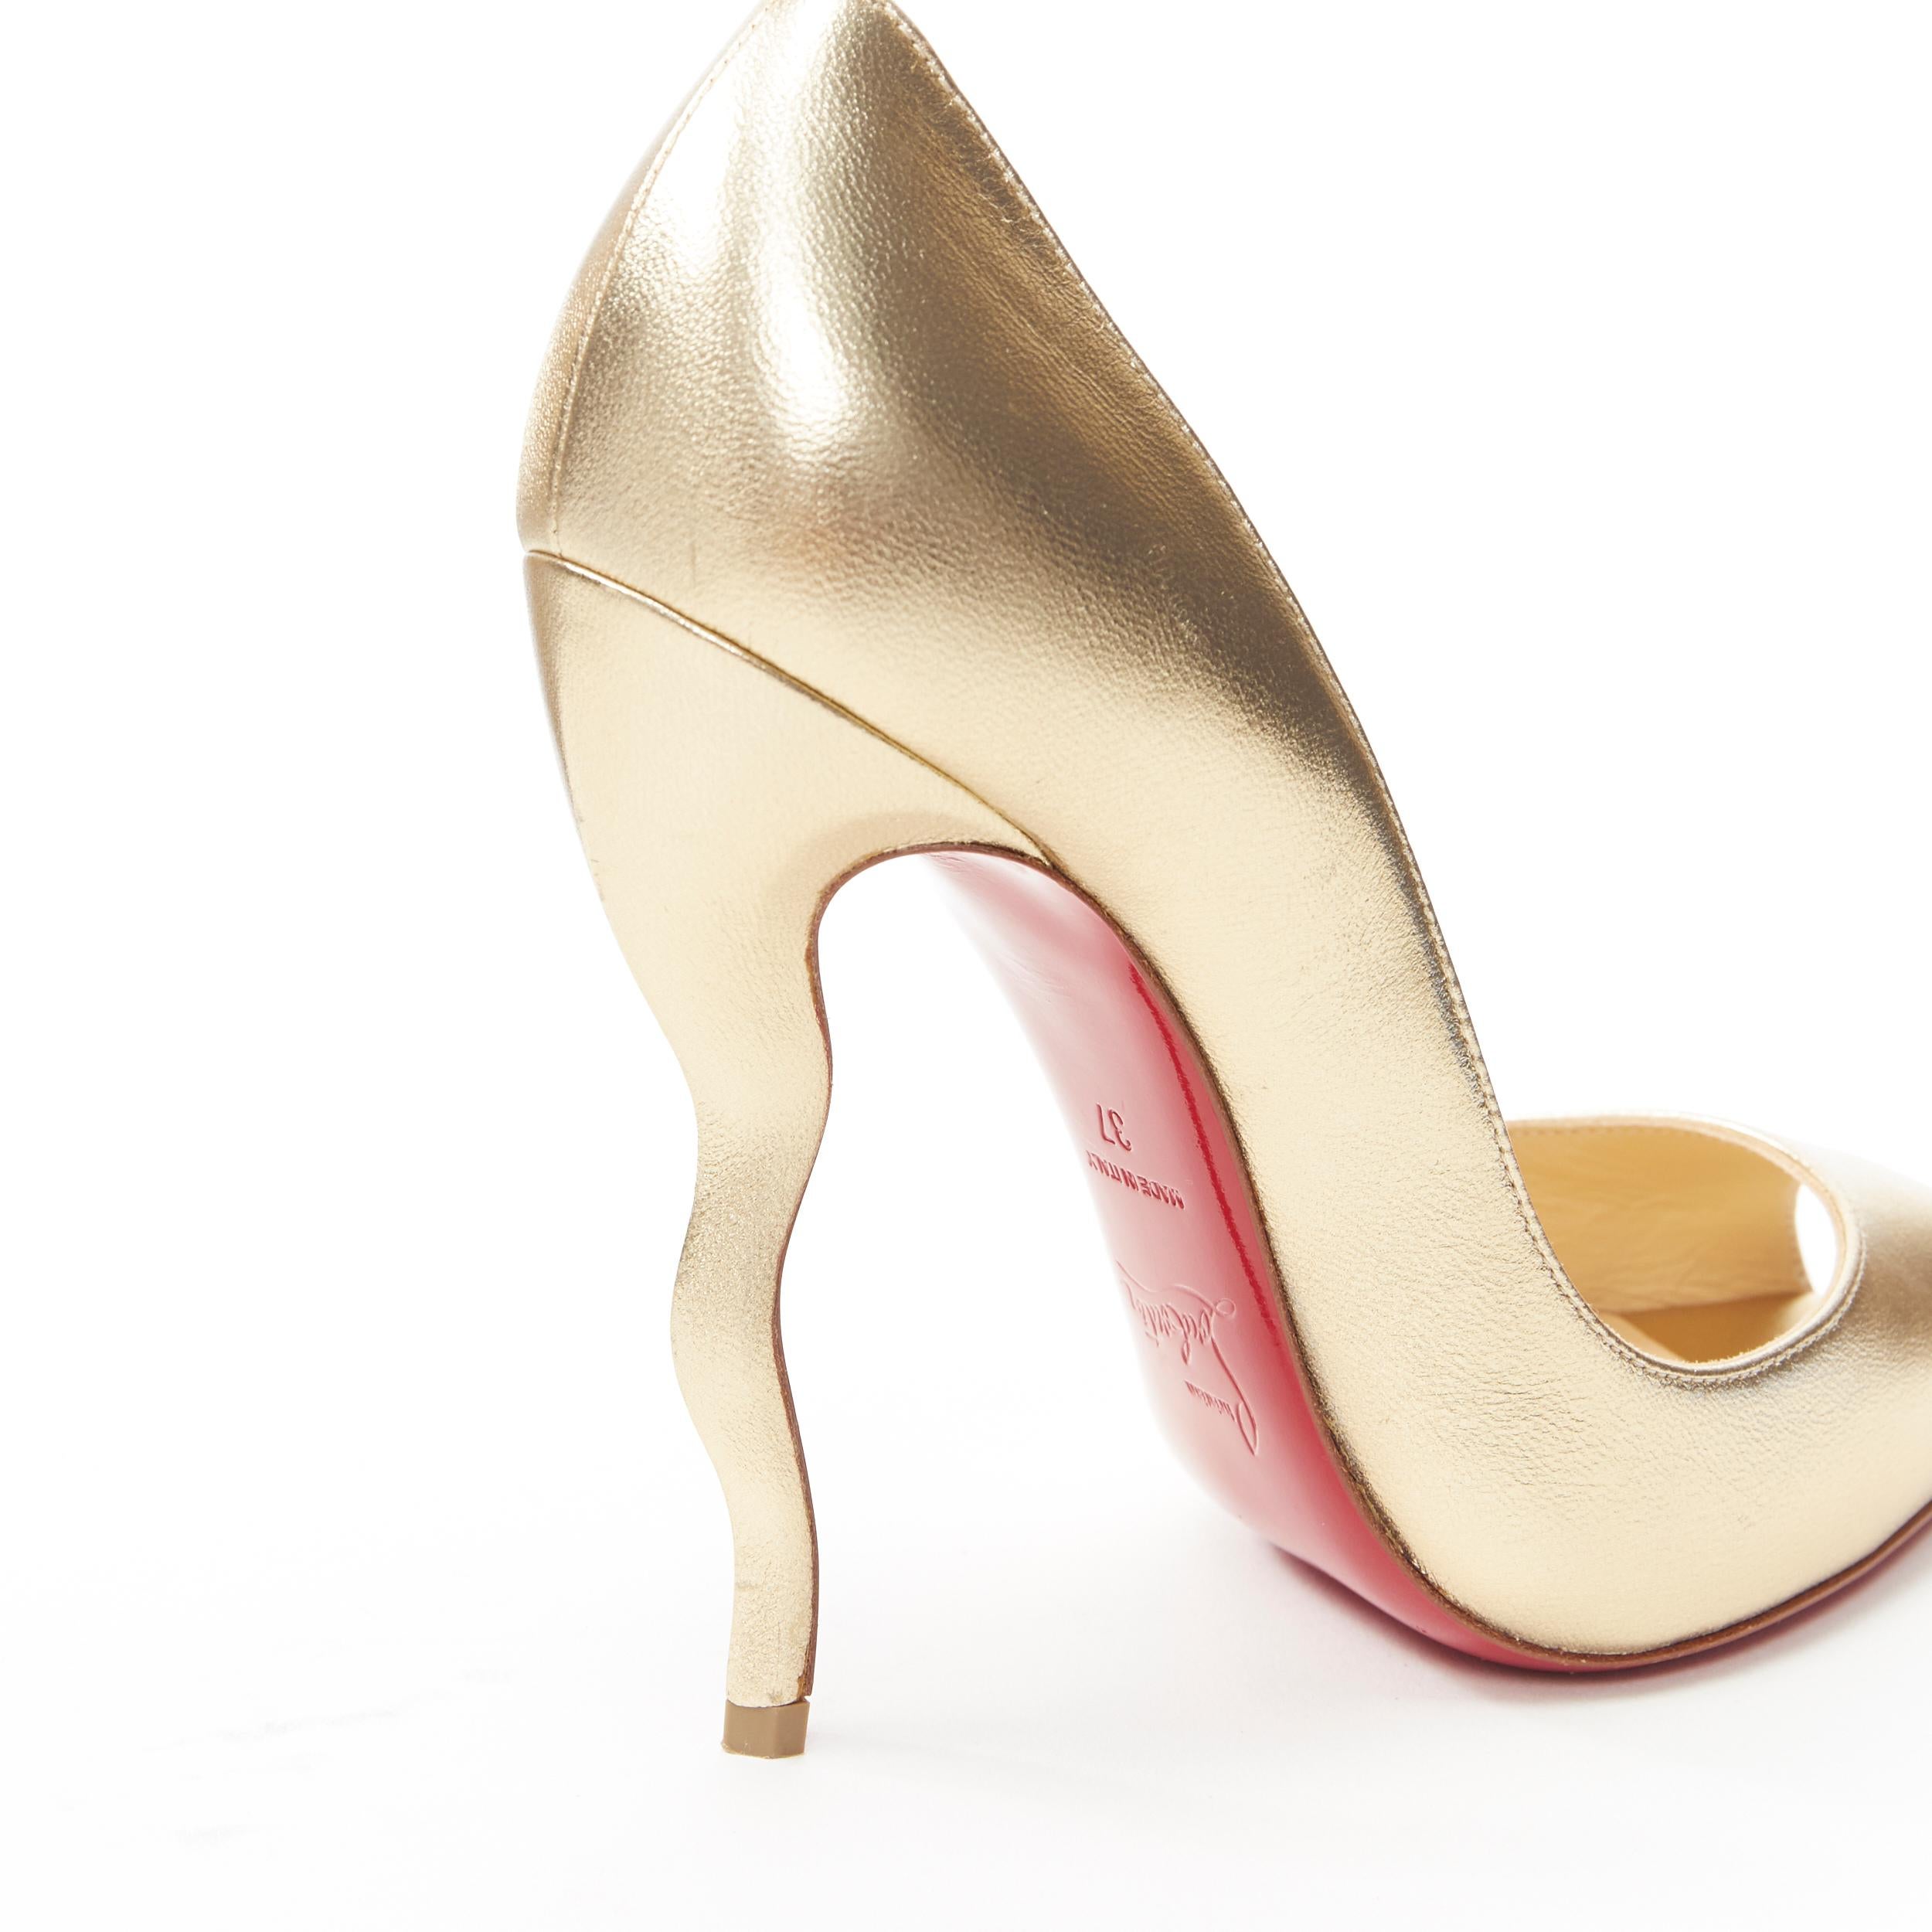 new CHRISTIAN LOUBOUTIN Jolly B metallic gold peep toe squiggly wavy heel EU37
Brand: Christian Louboutin
Designer: Christian Louboutin
Model Name / Style: Jolly B
Material: Leather
Color: Gold
Pattern: Solid
Extra Detail: Peep toe. Squiggly